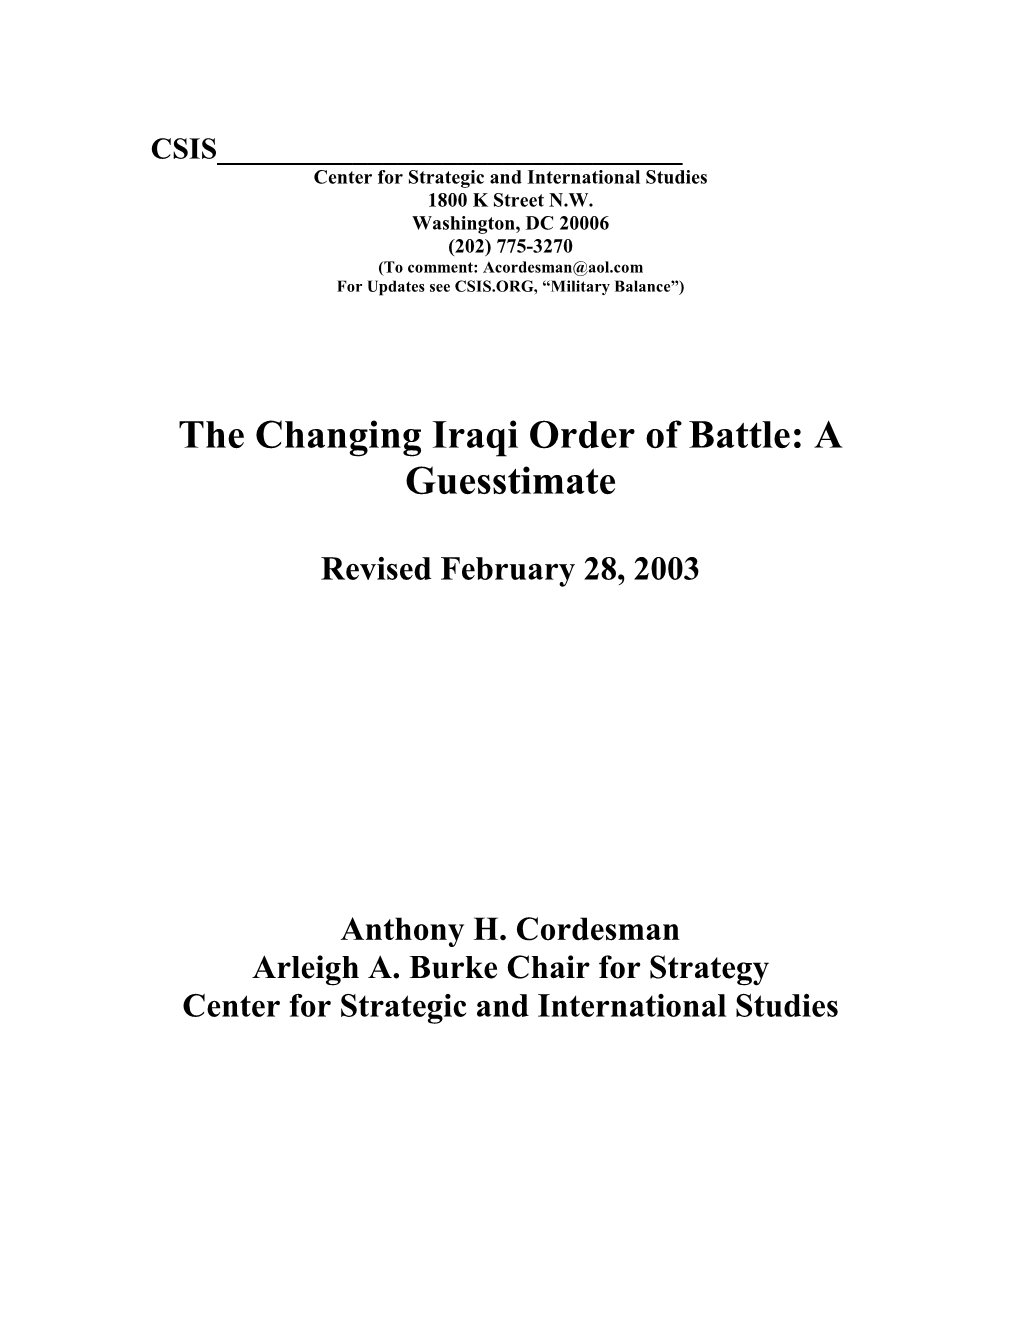 The Changing Iraqi Order of Battle: a Guesstimate